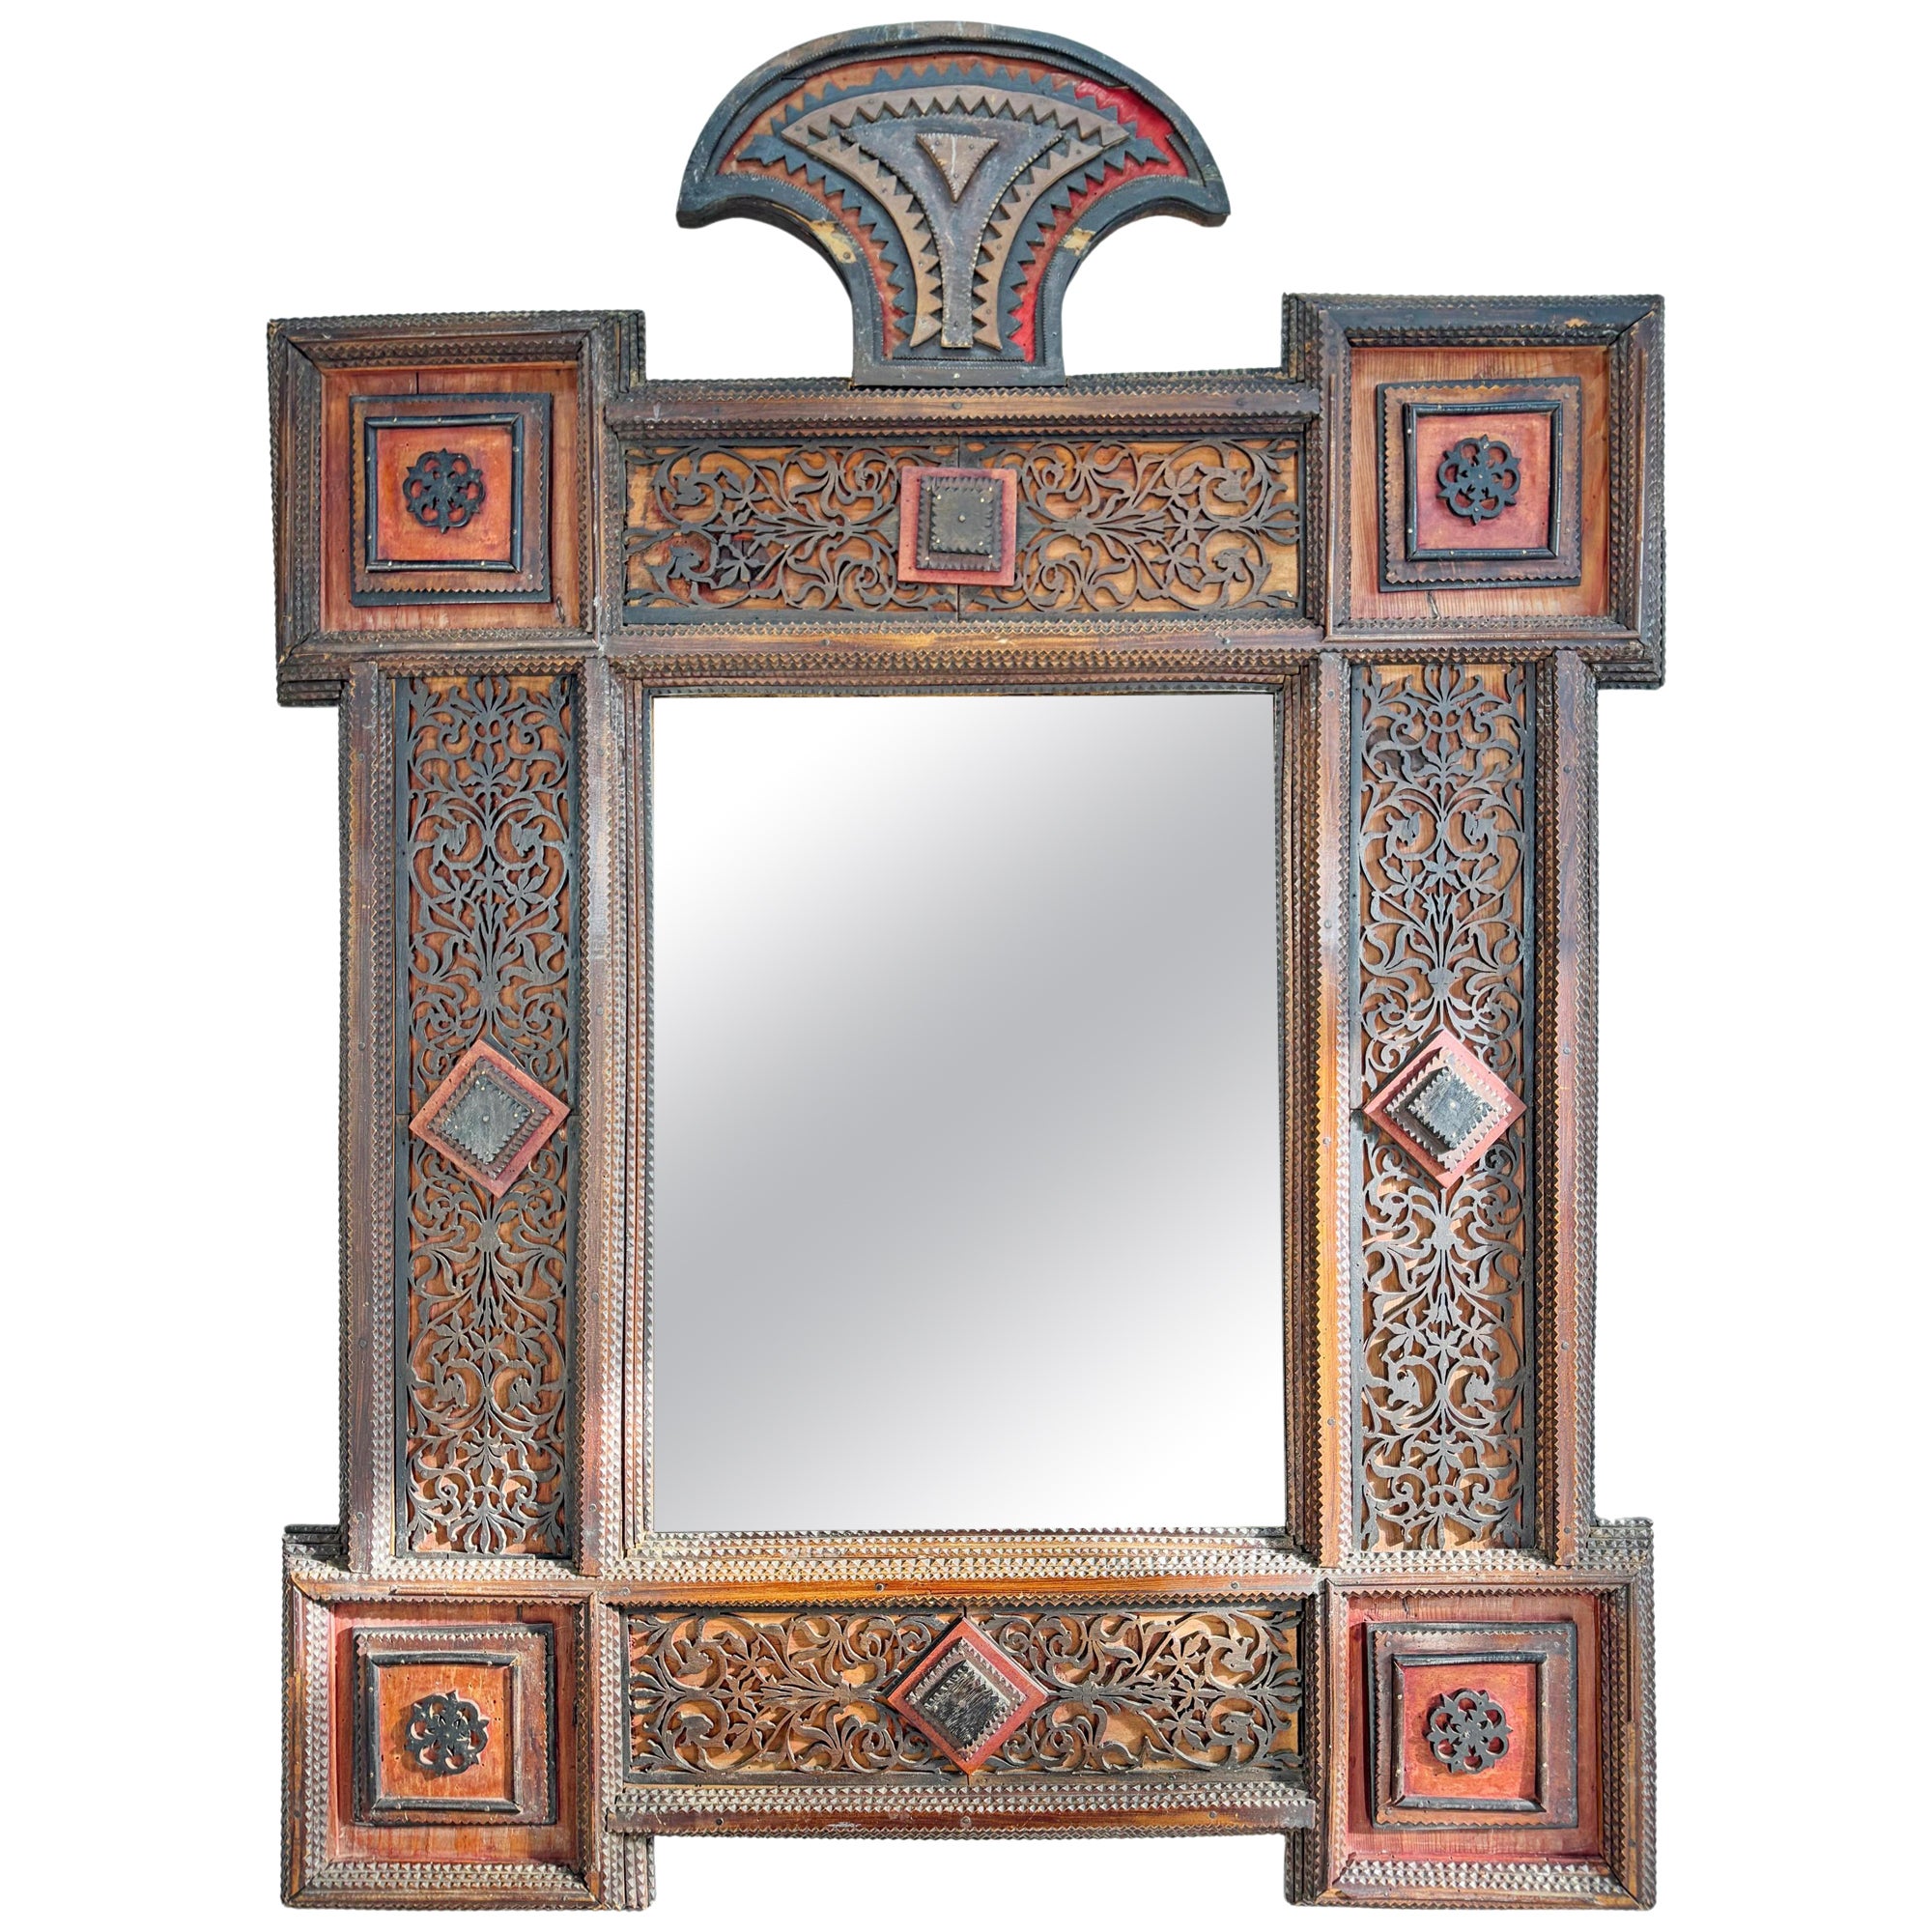 19th Century German Crested Tramp Art Mirror with Fretwork Detailing For Sale